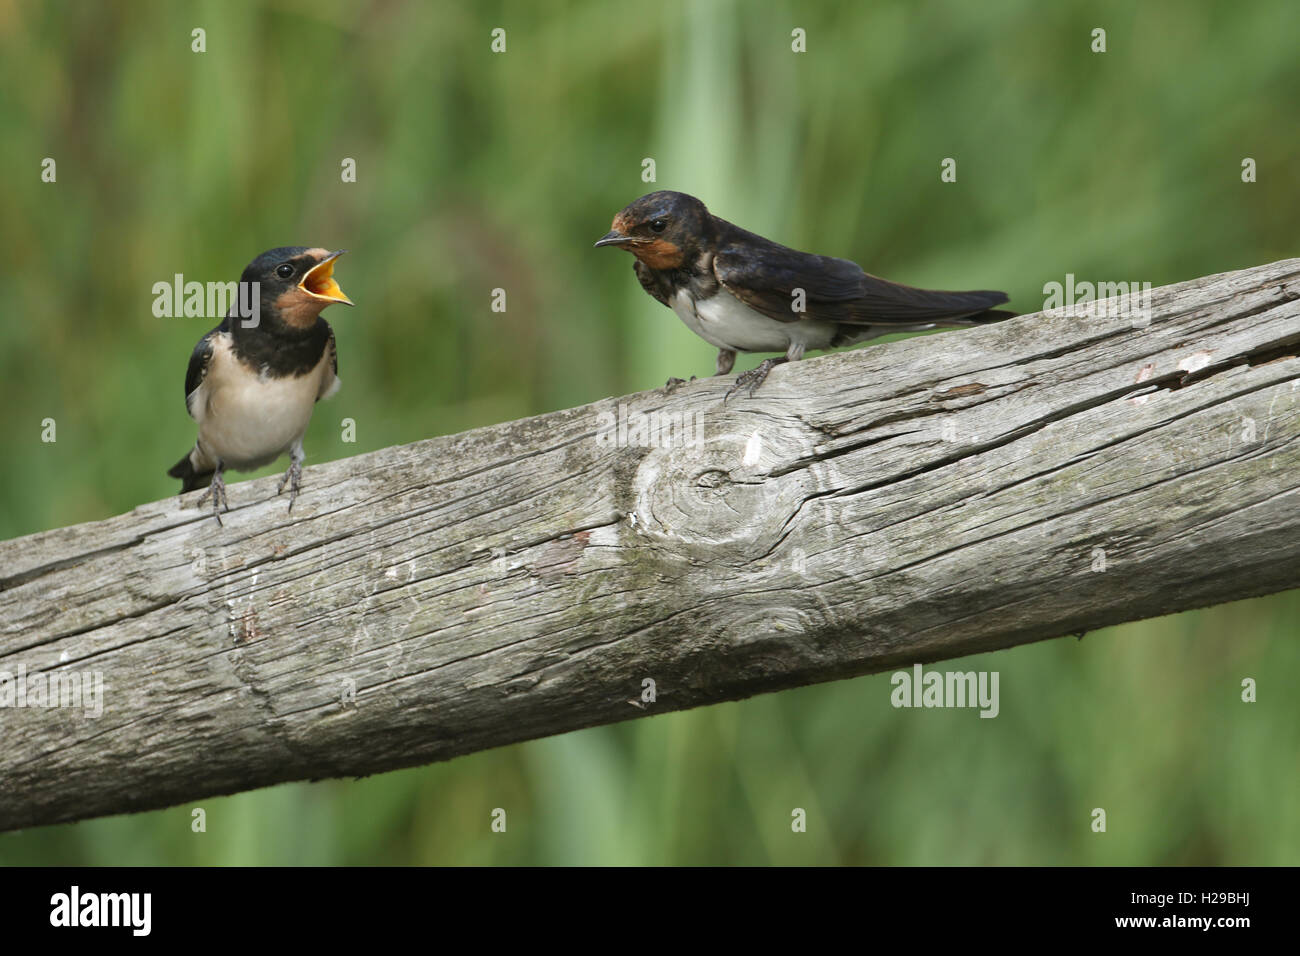 Young Swallows (Hirundo rustica) perched on a fence post waiting for their parents to return with food to feed them. Stock Photo